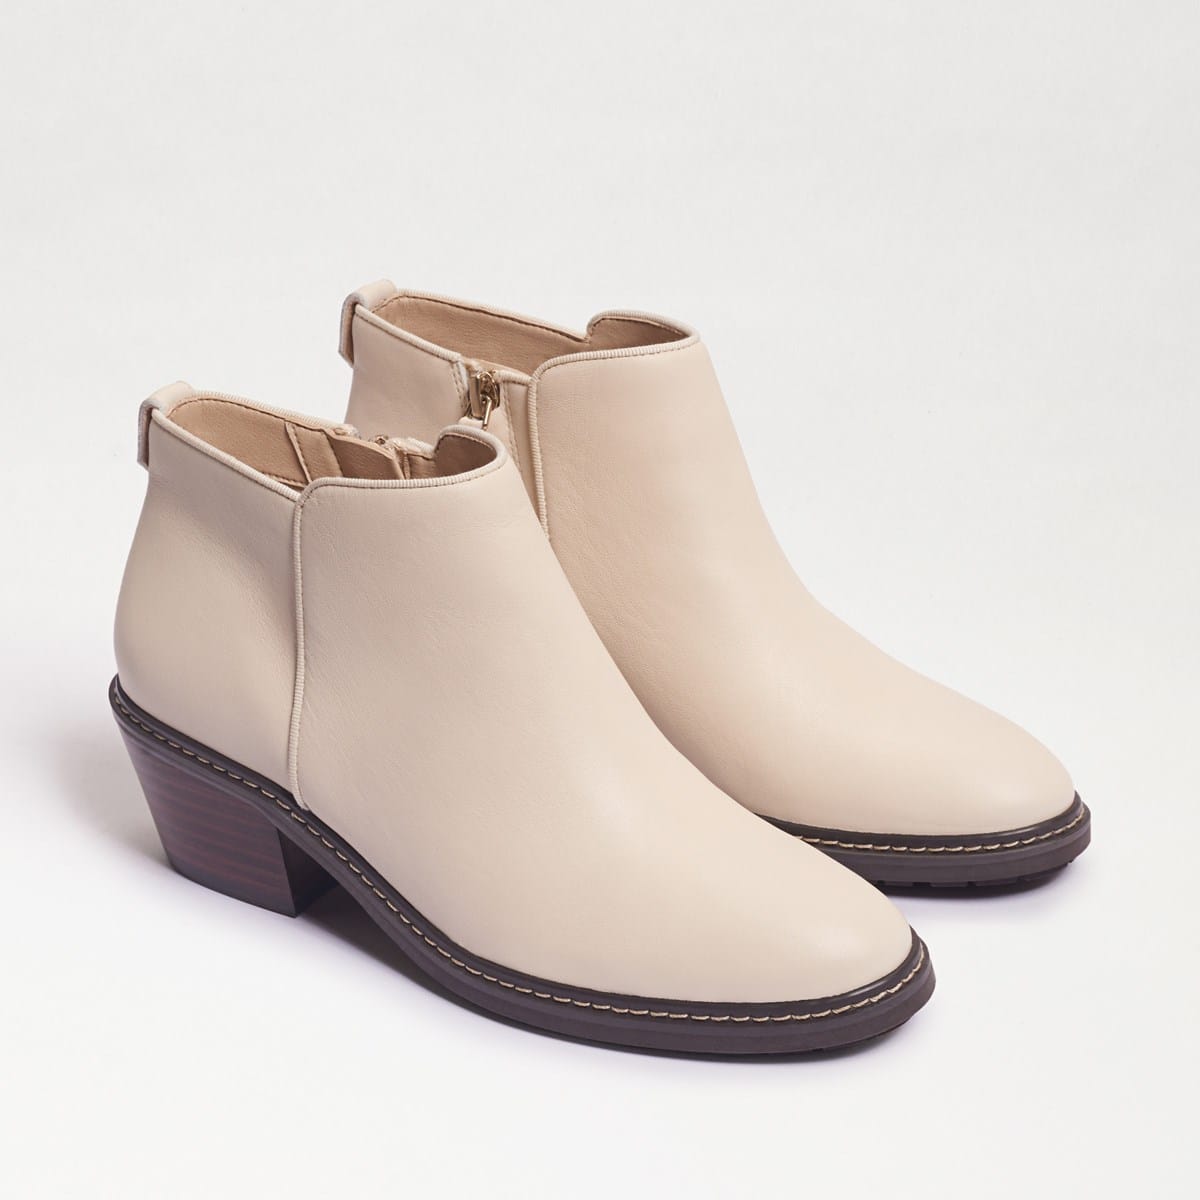 Sam Edelman Pryce Ankle Bootie Modern Ivory Leather ZvFmEOr6